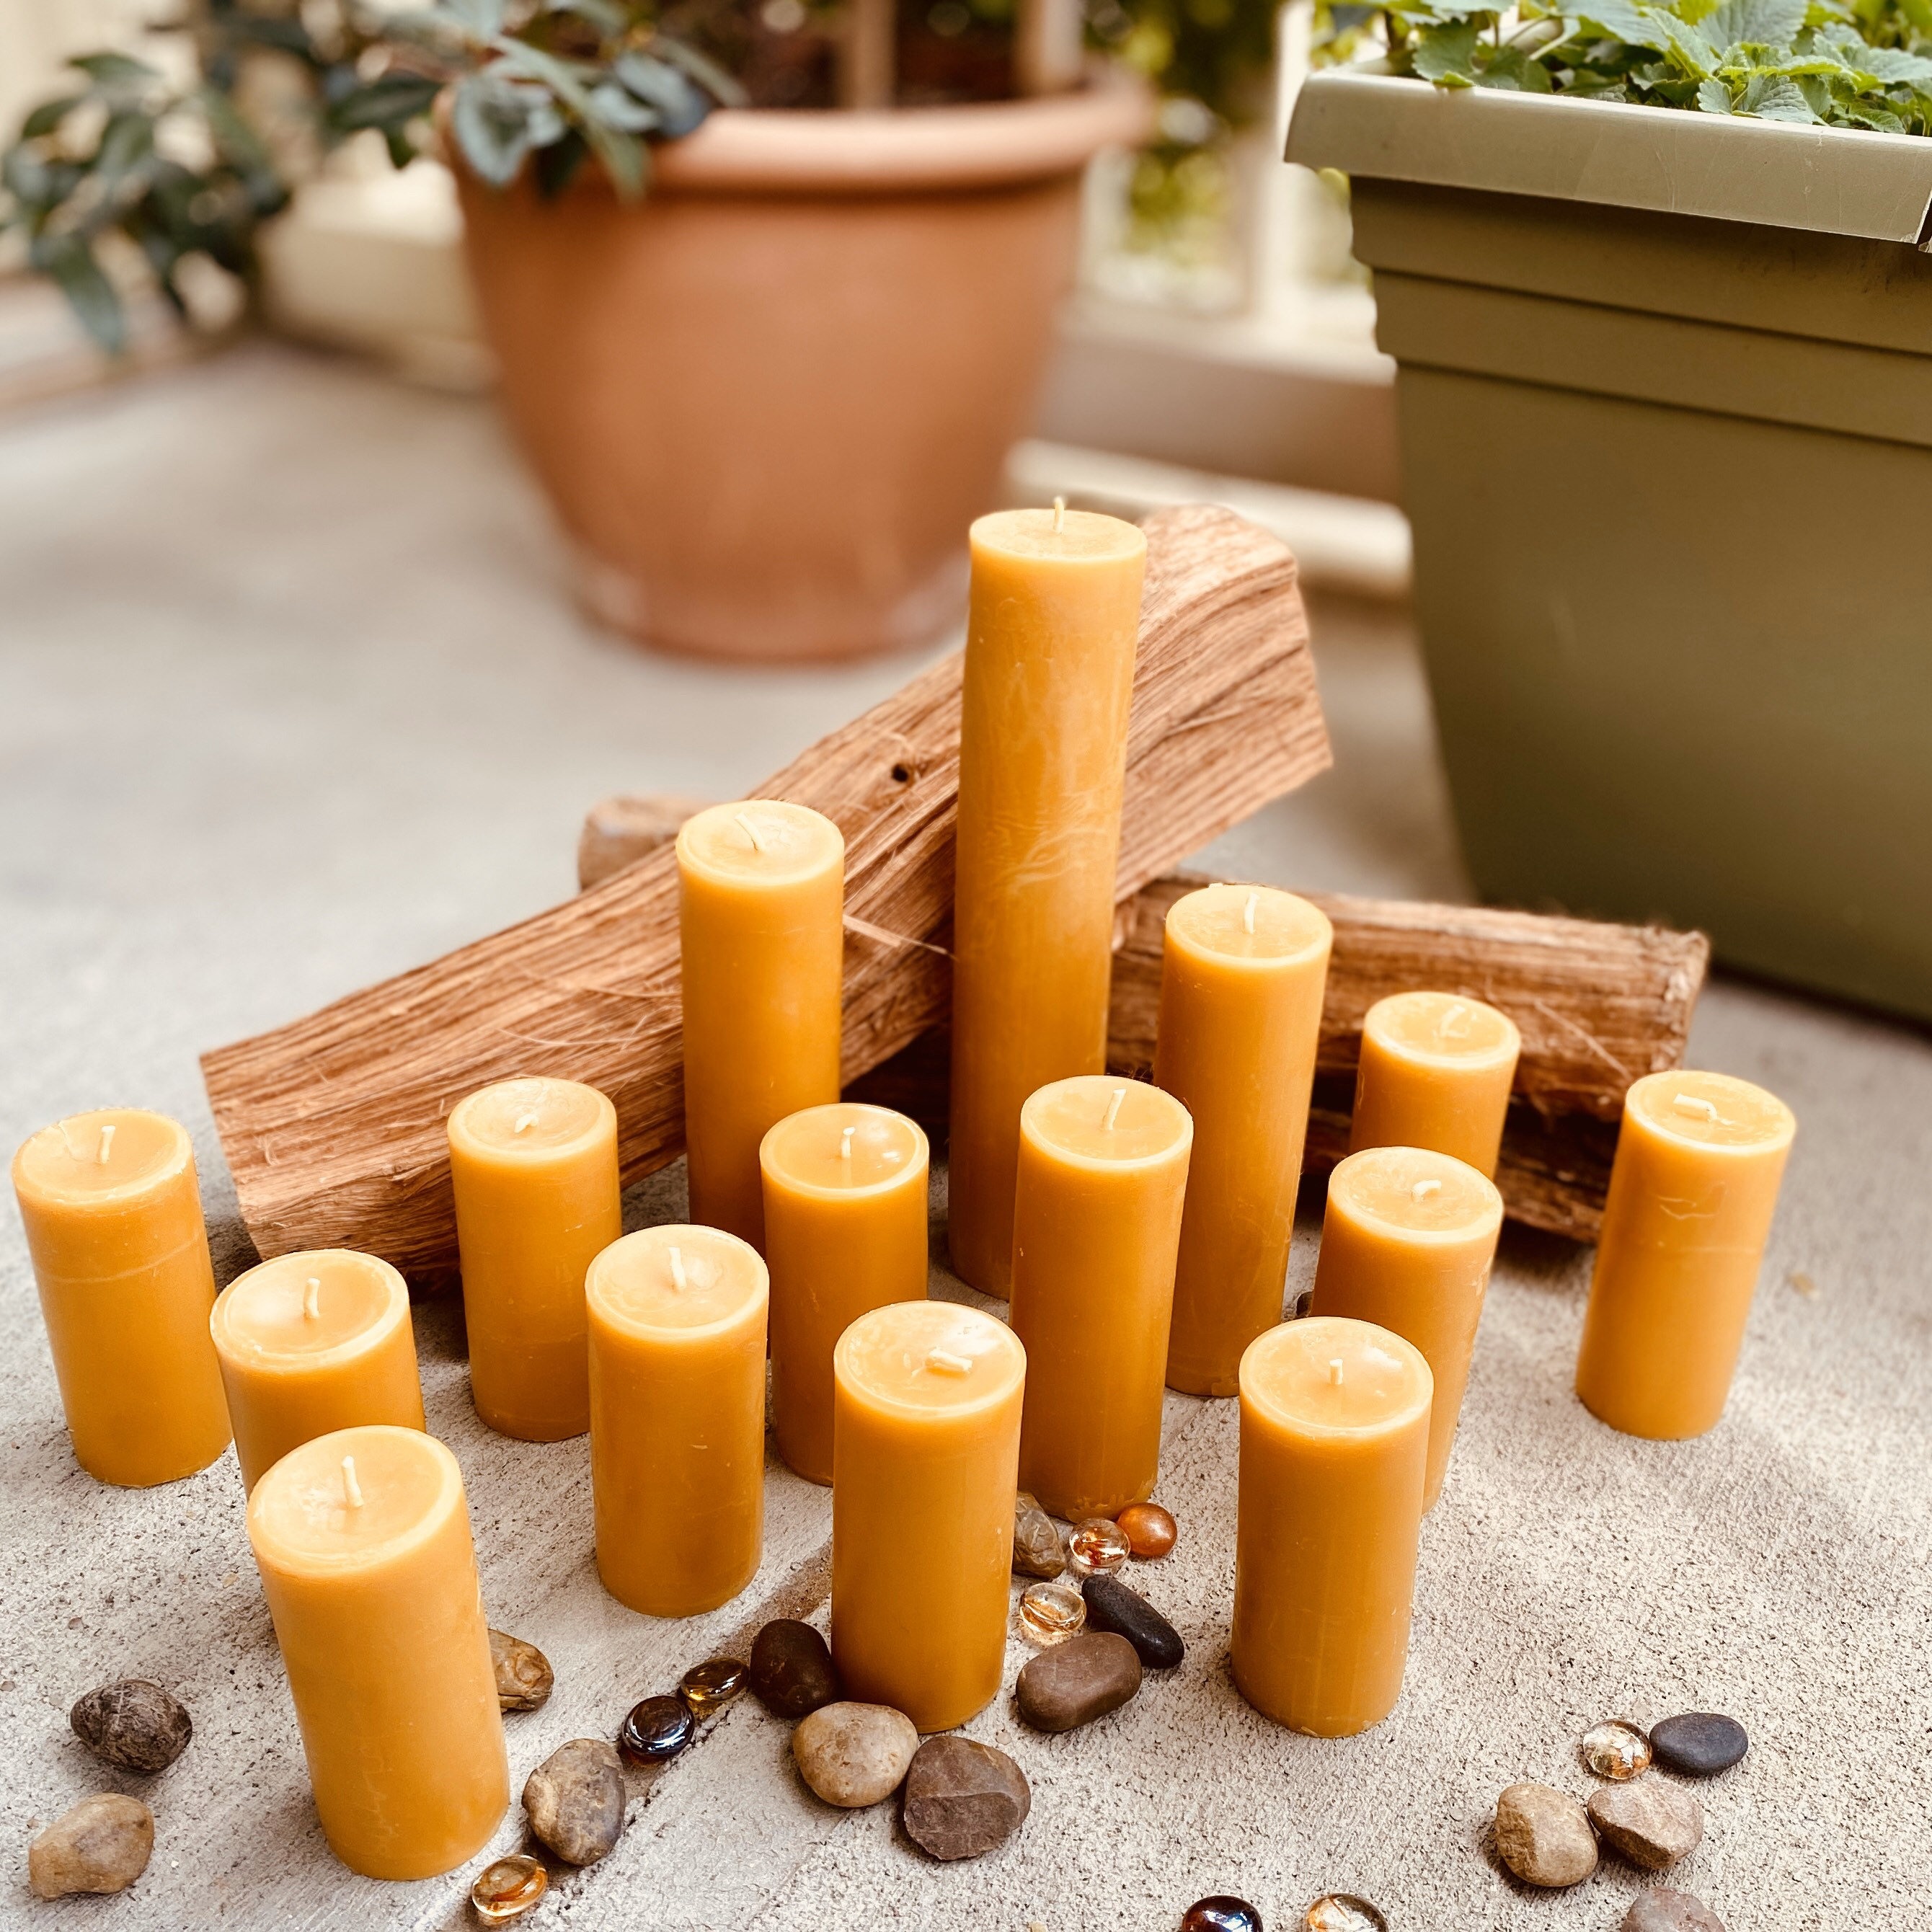 100% Pure Beeswax Candles Handmade 4x3 Inches Round Pillar Natural